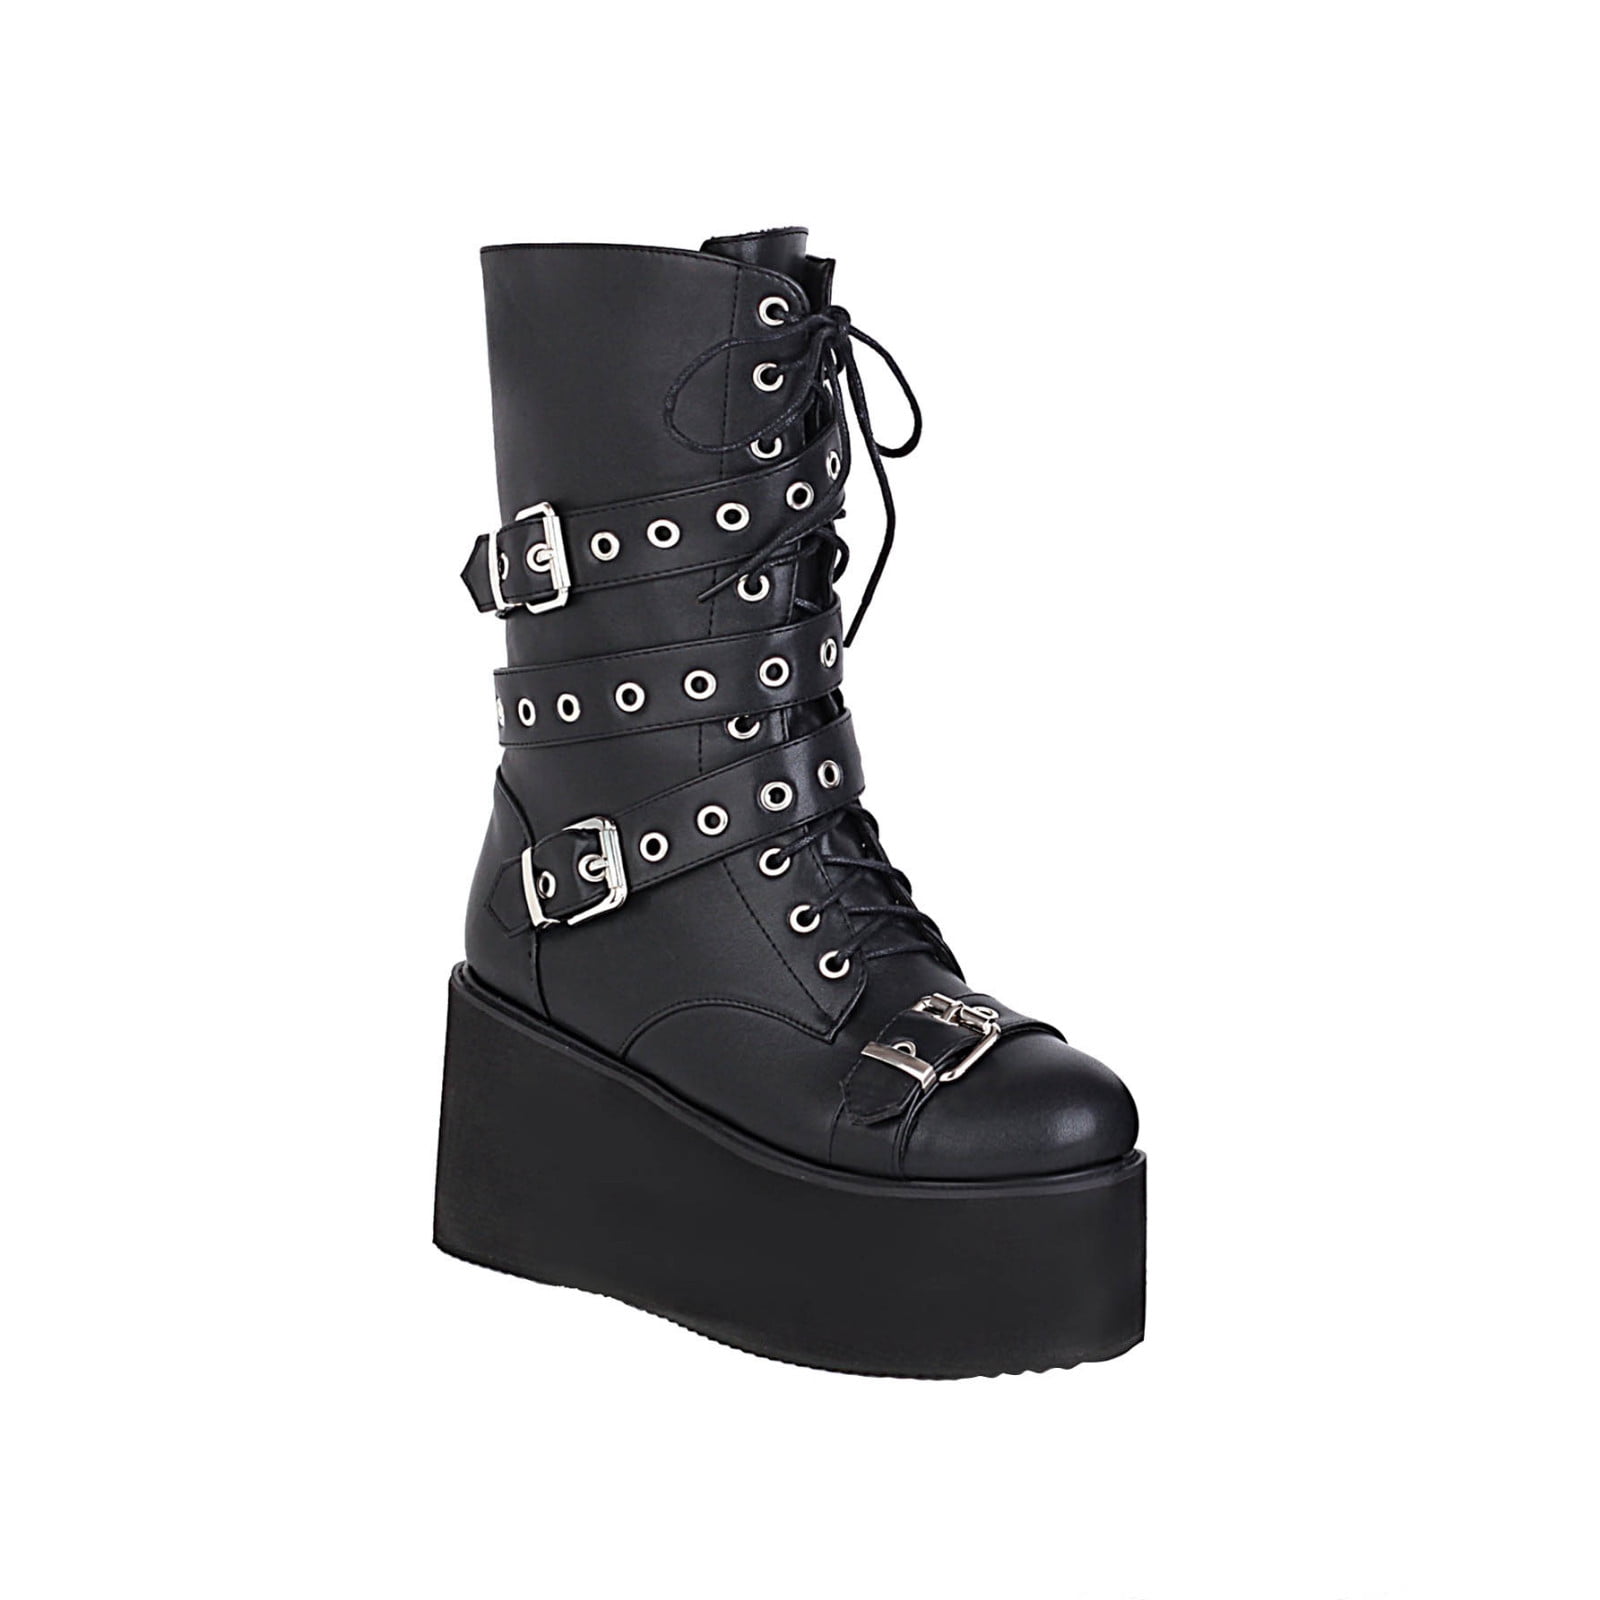 Gothic Women's Platform Ankle Boots with Loose Chain Lace Up Buckles and Thin Heels